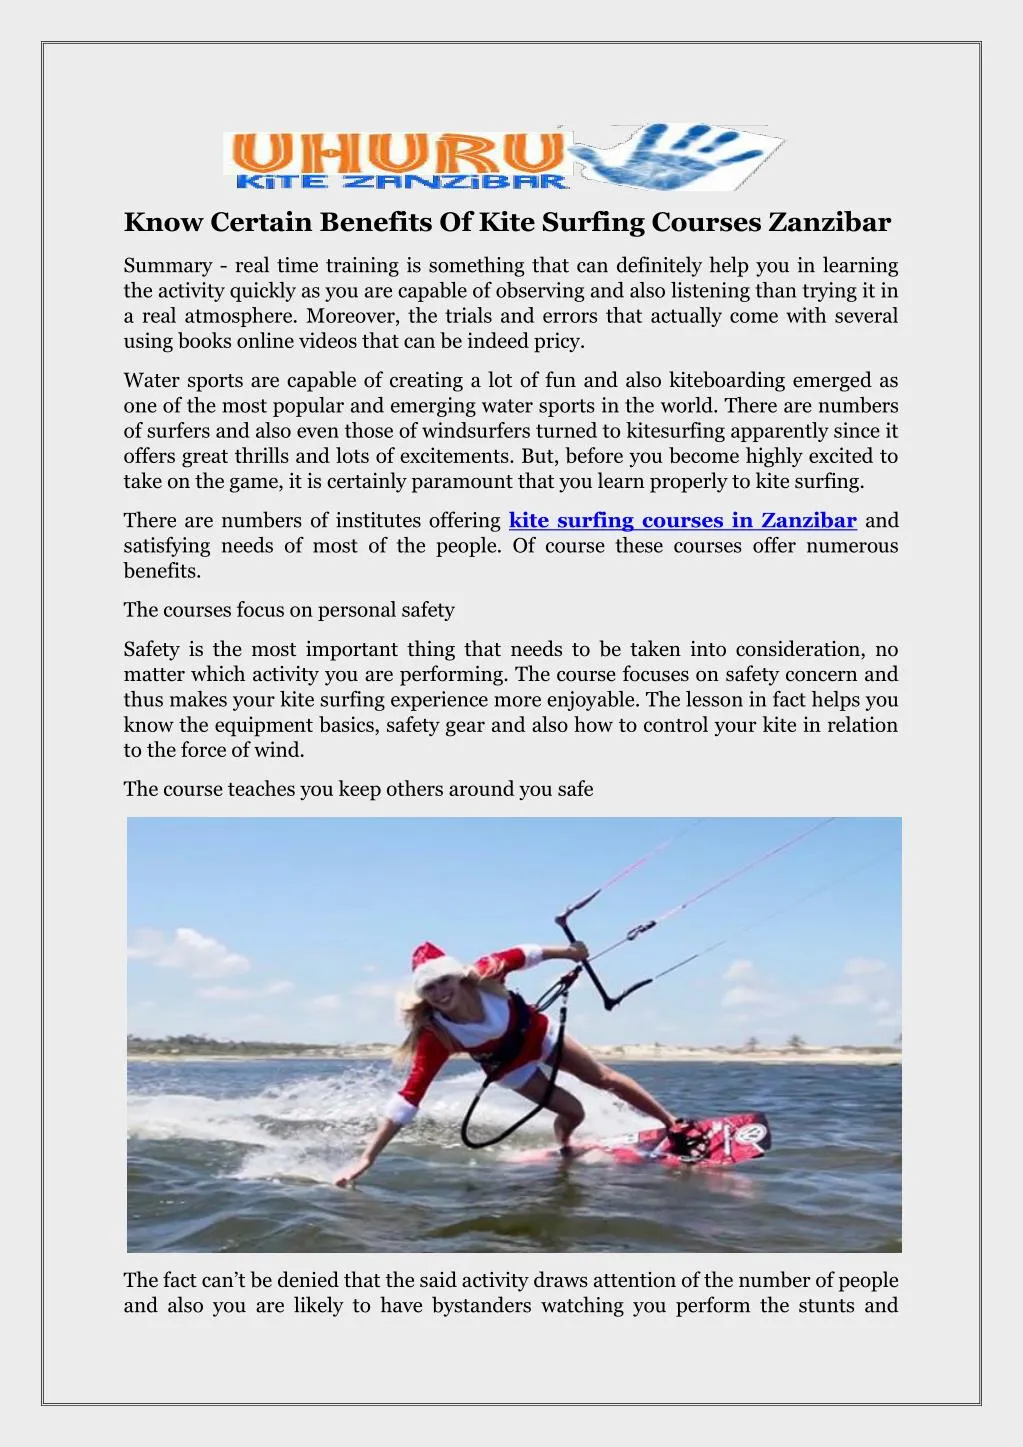 know certain benefits of kite surfing courses